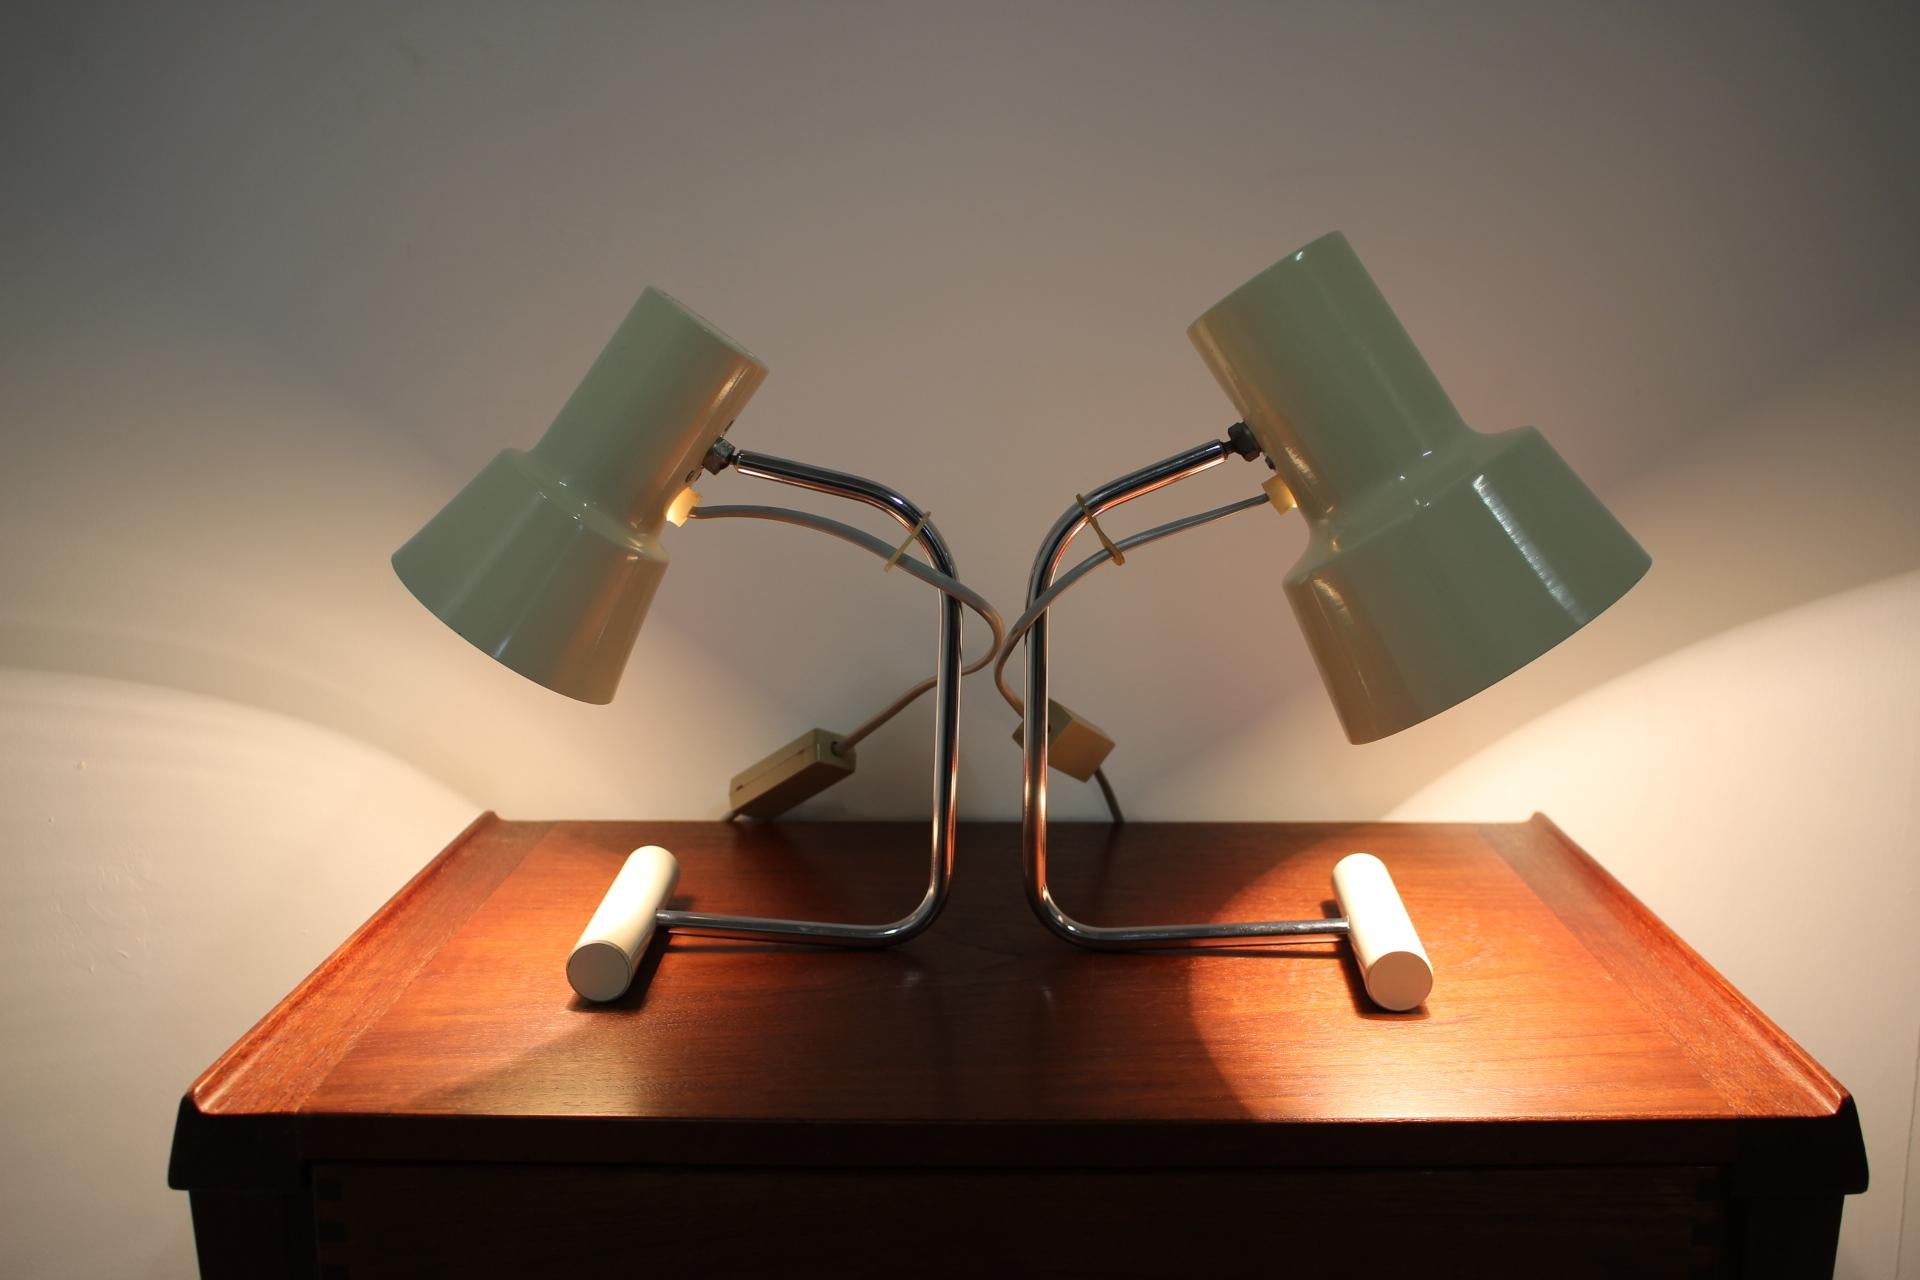 Metal Set of Two Beige Table Lamps Designed by Josef Hůrka for Napako, 1970s For Sale